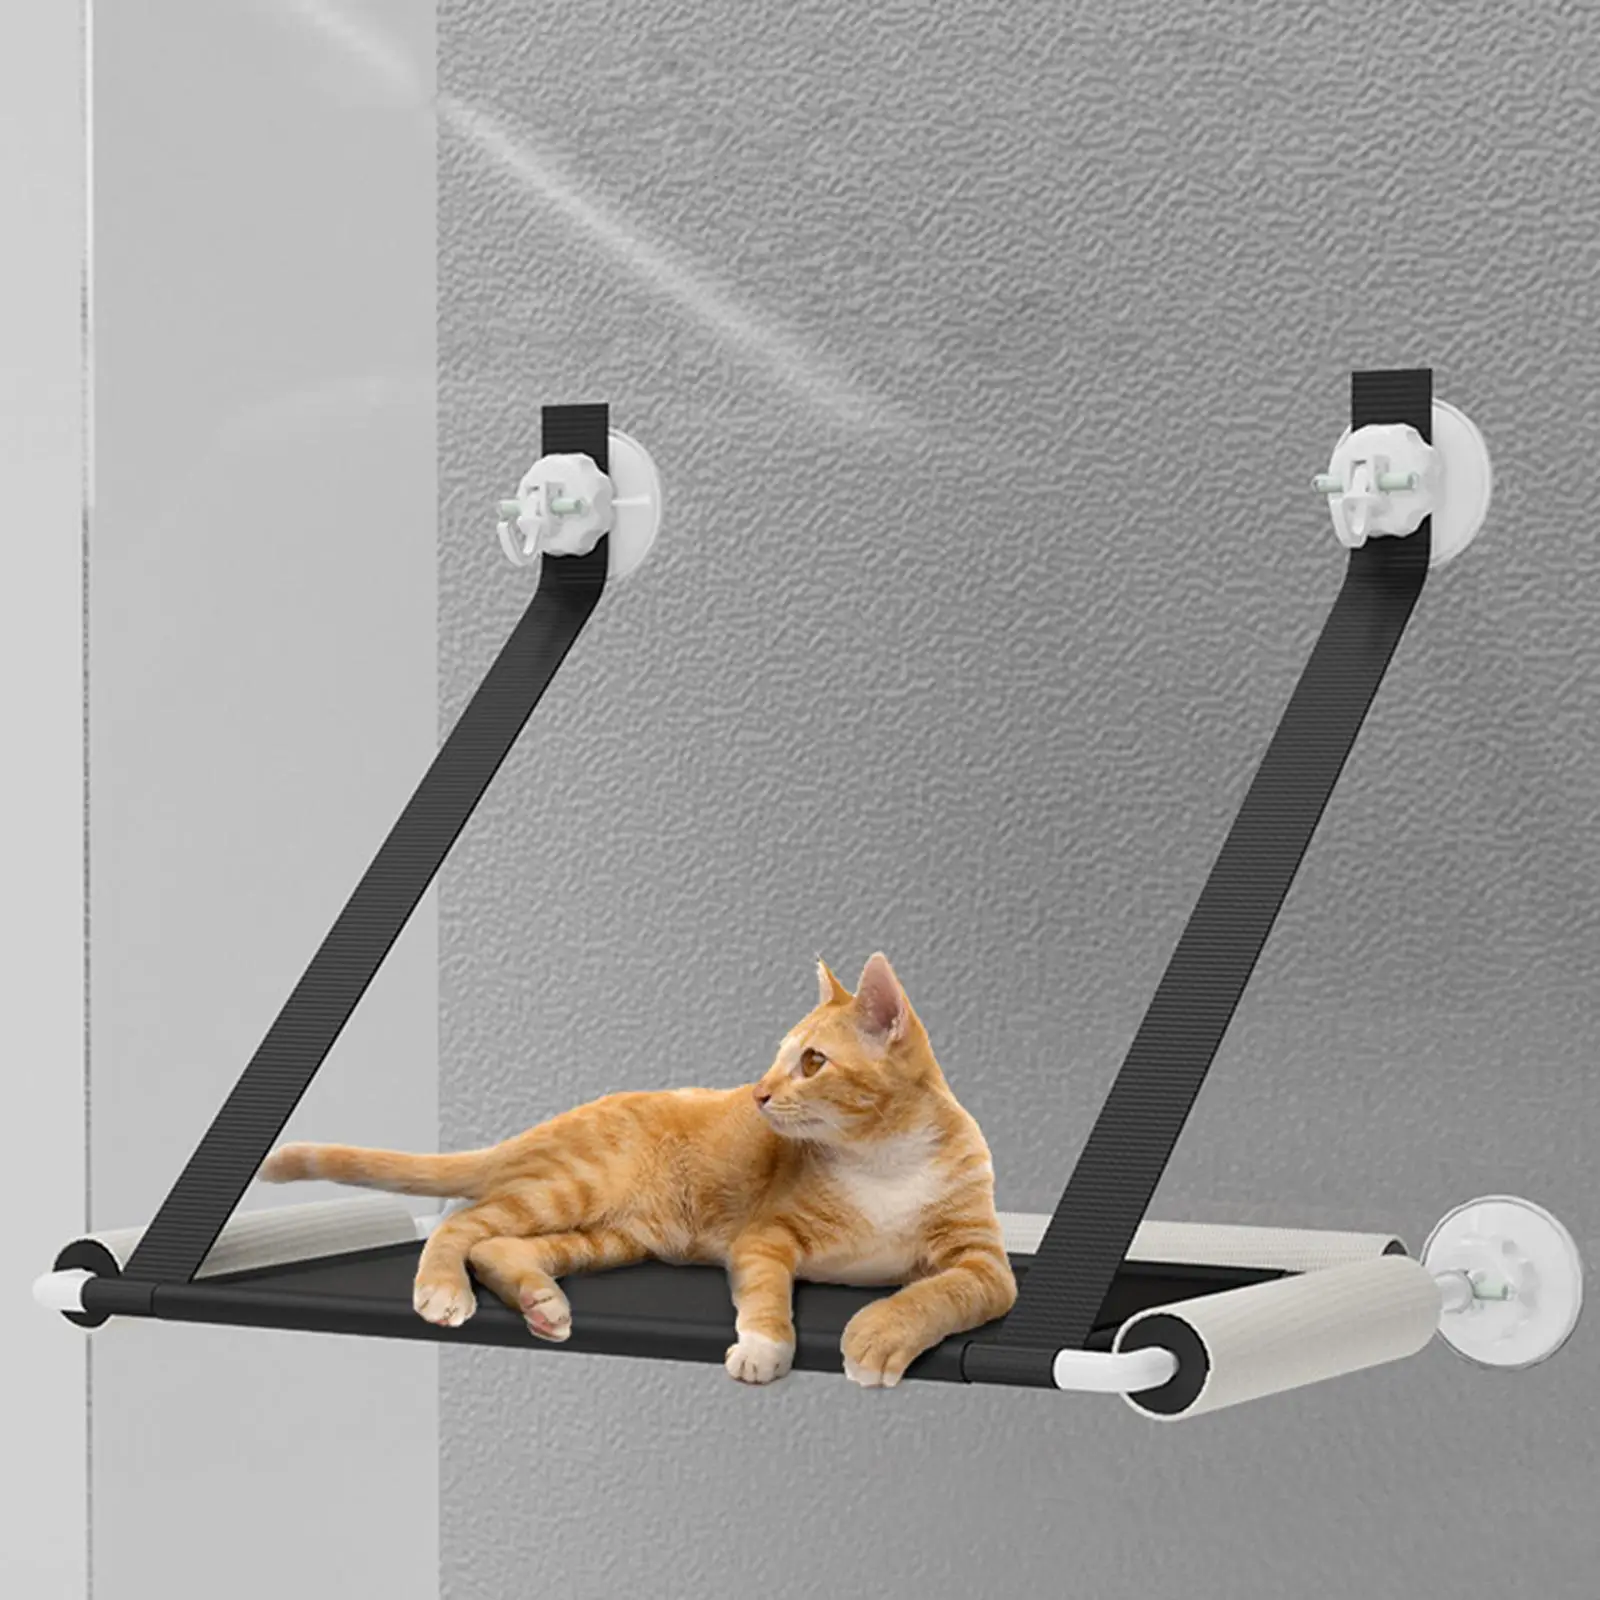 Cat Hammock, Window Mounted Durable Cat post for scratching for Indoor Cats Lounging